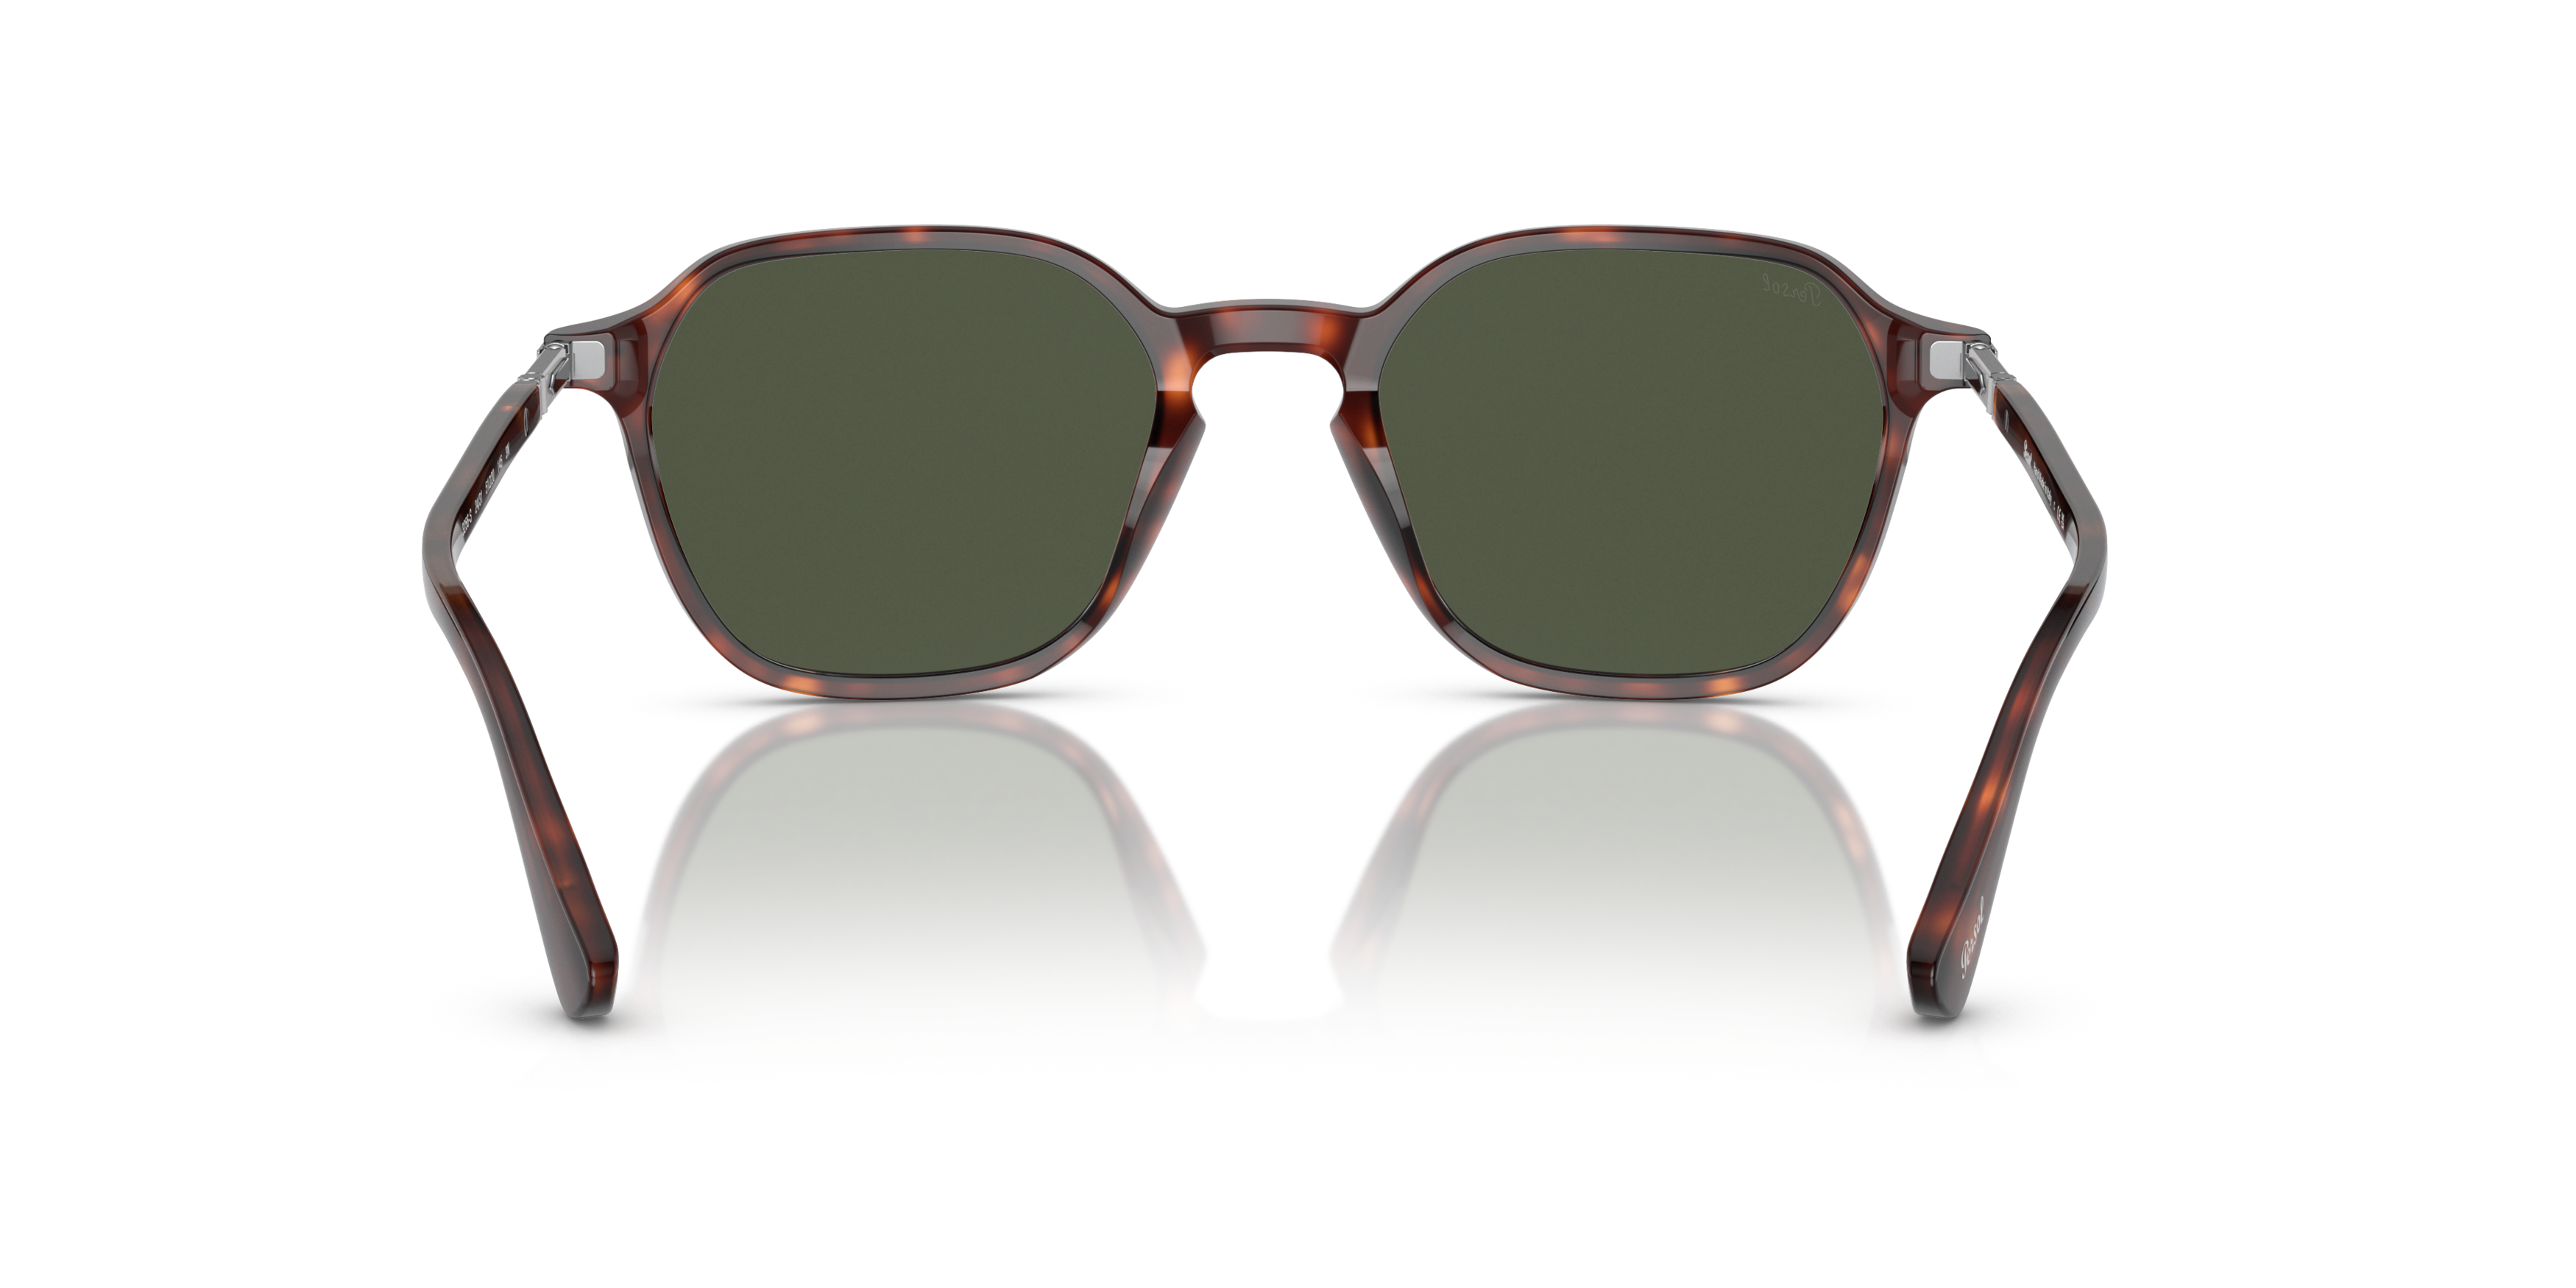 [products.image.detail02] PERSOL PO3256S 24/31